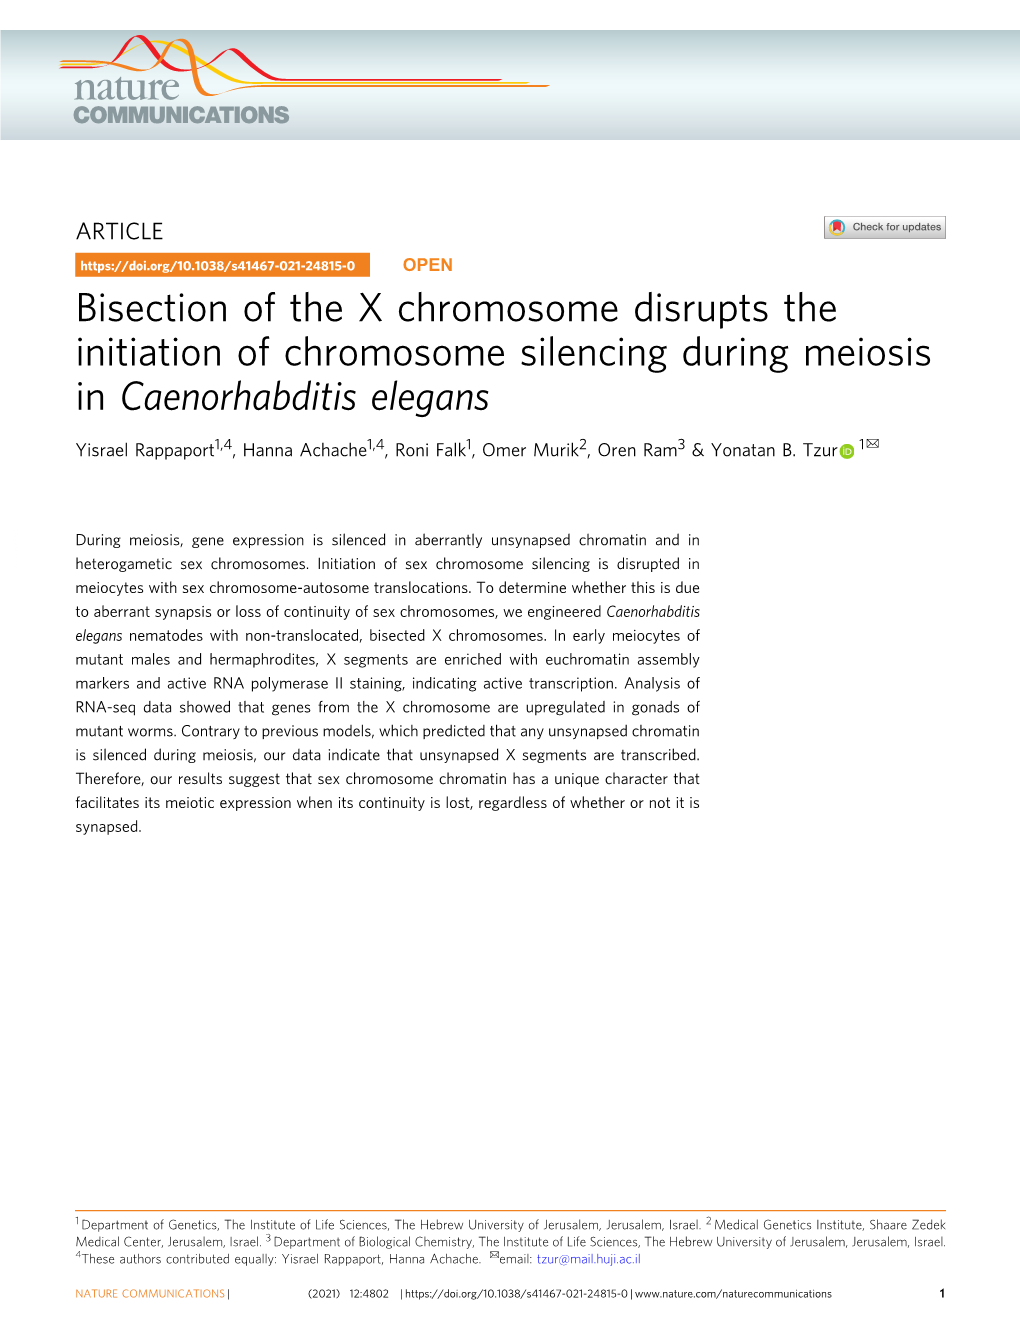 Bisection of the X Chromosome Disrupts the Initiation Of